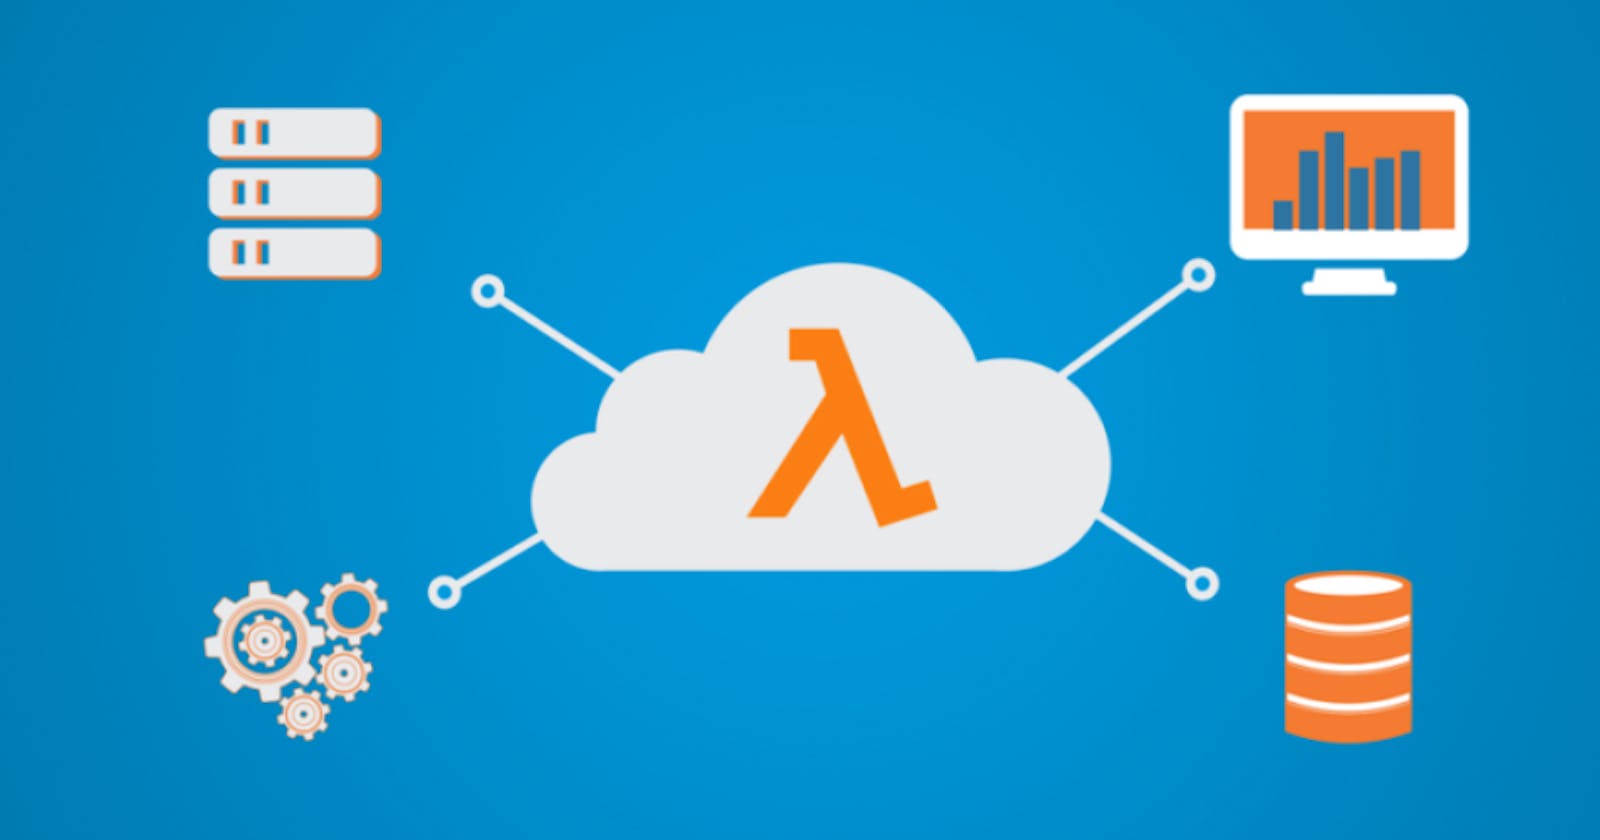 10 Questions to Understand 
The Advantages of Serverless Computing with AWS Lambda